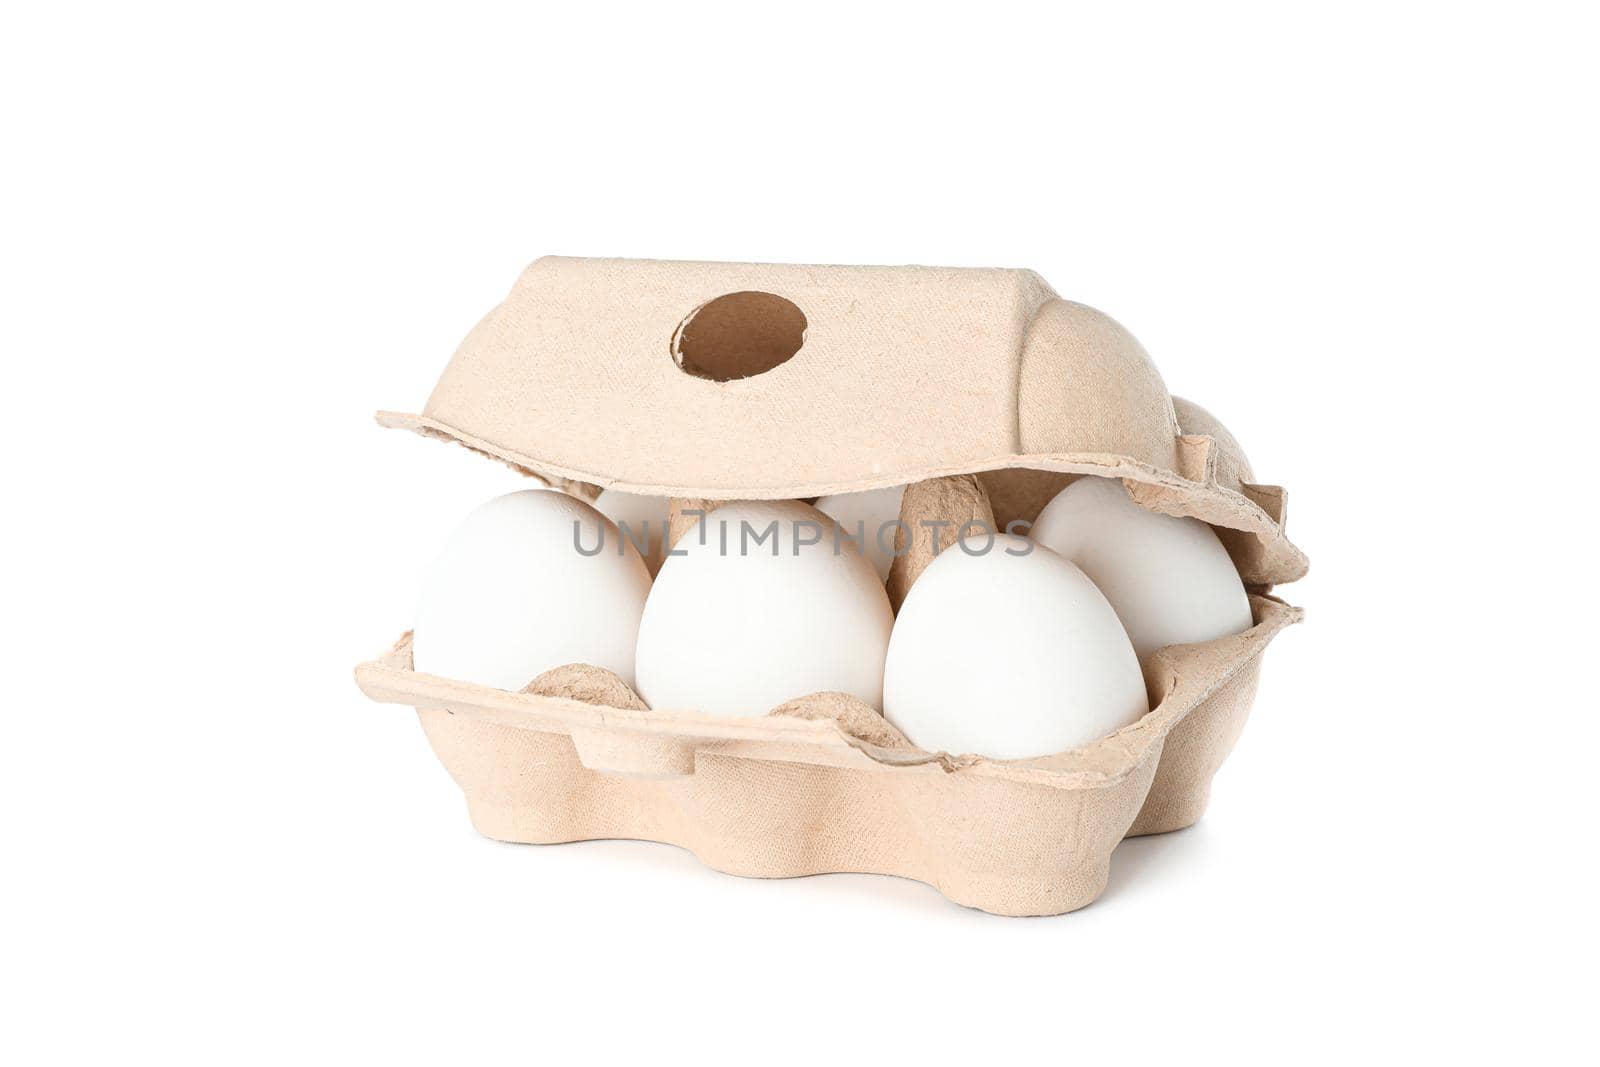 White chicken eggs in carton box isolated on white background by AtlasCompany